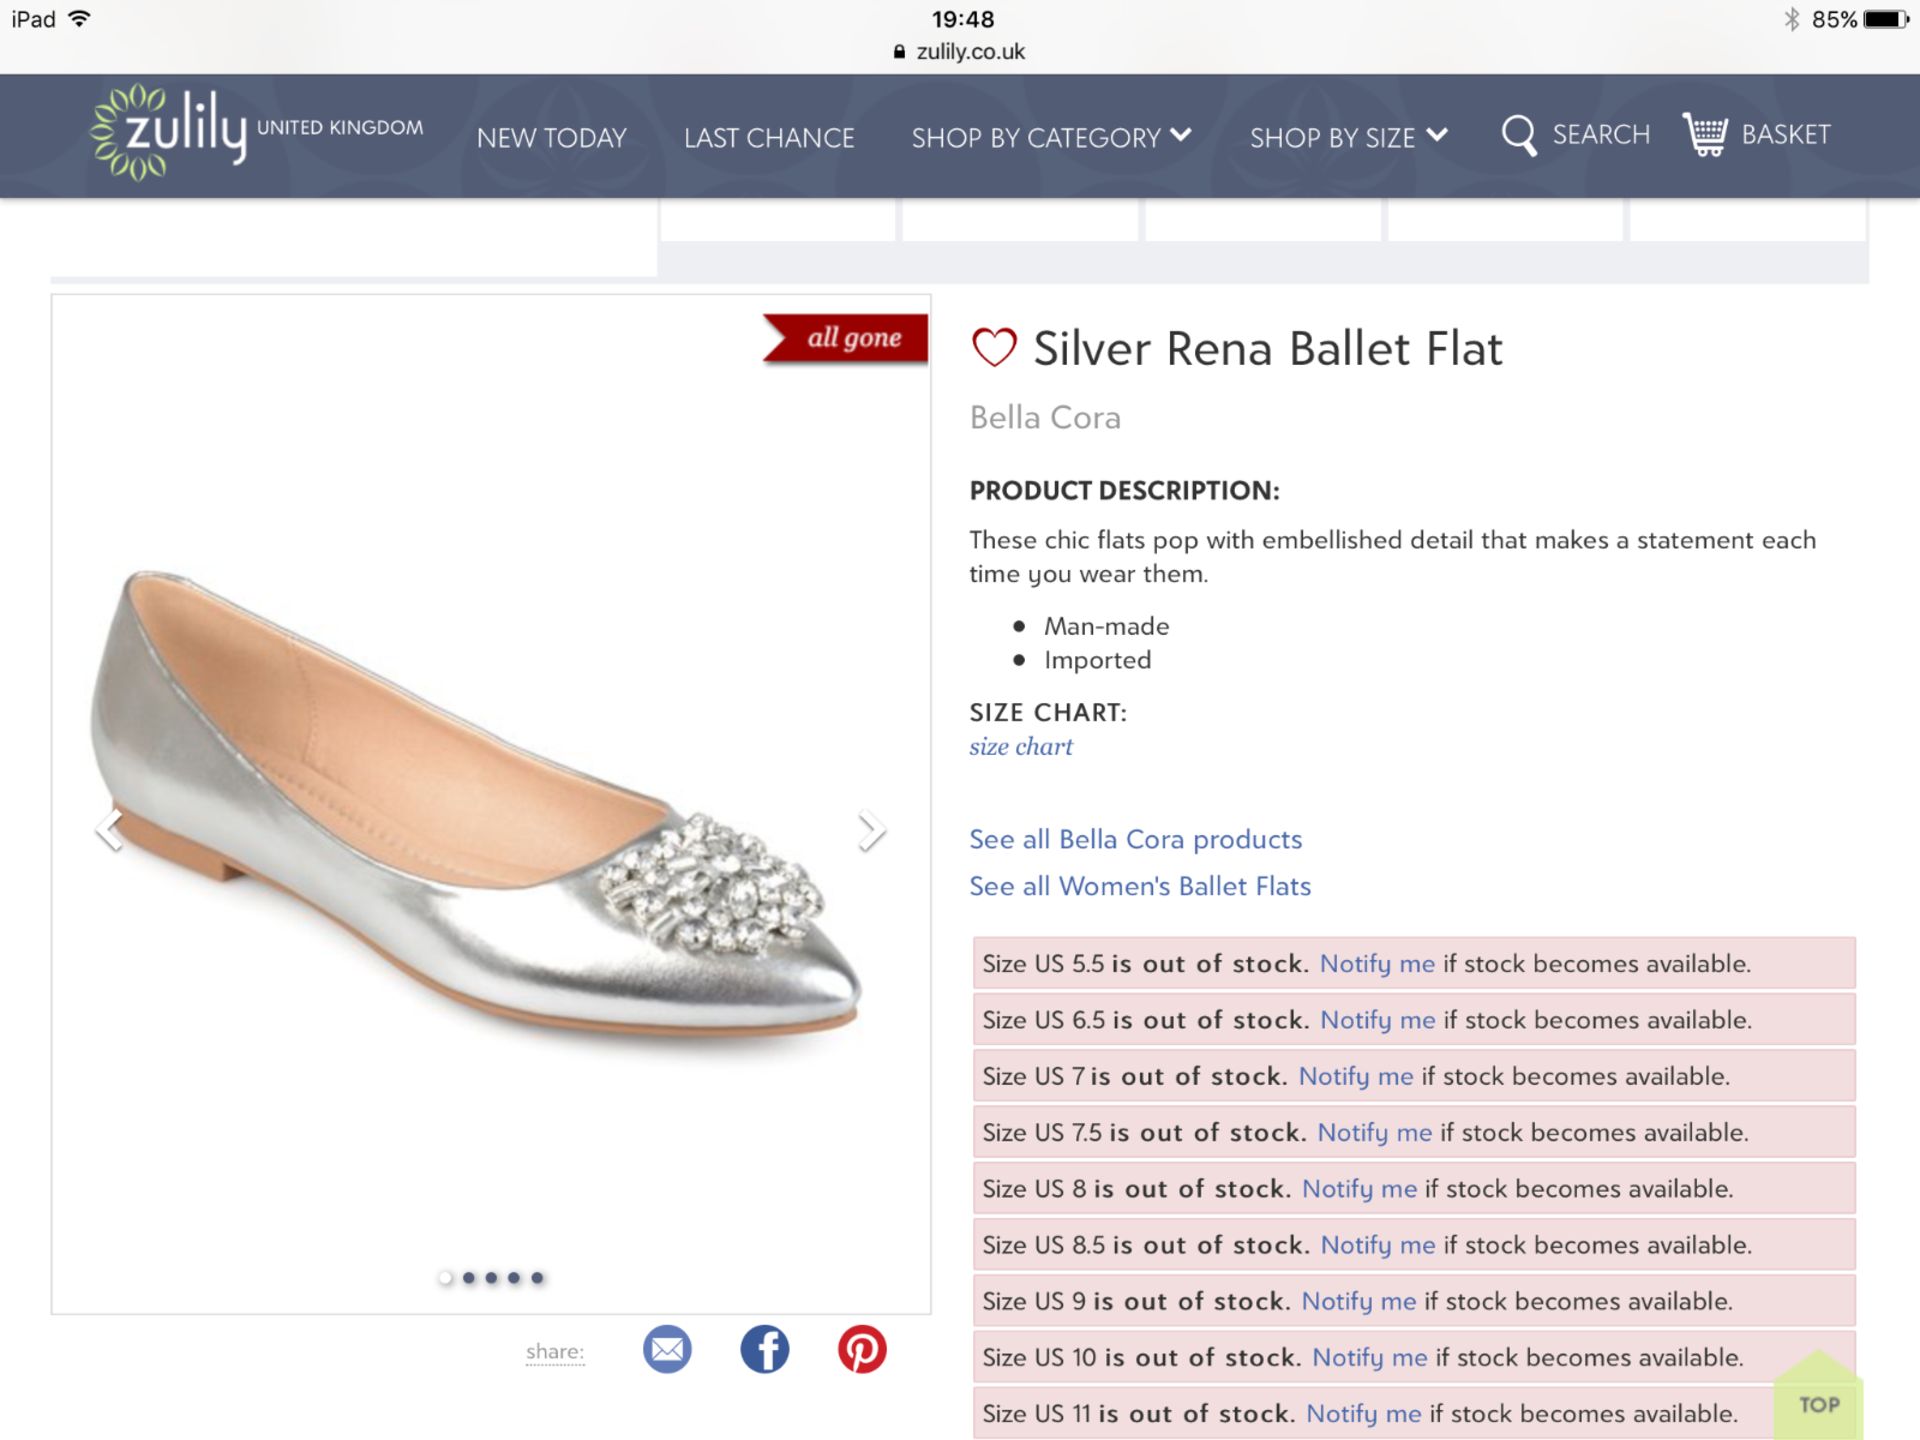 Bella Cora Silver Rena Ballet Flat, Size Uk 4.5 Us 7 (New With Box) [Ref: 53391740 G4]-Tf - Image 6 of 6